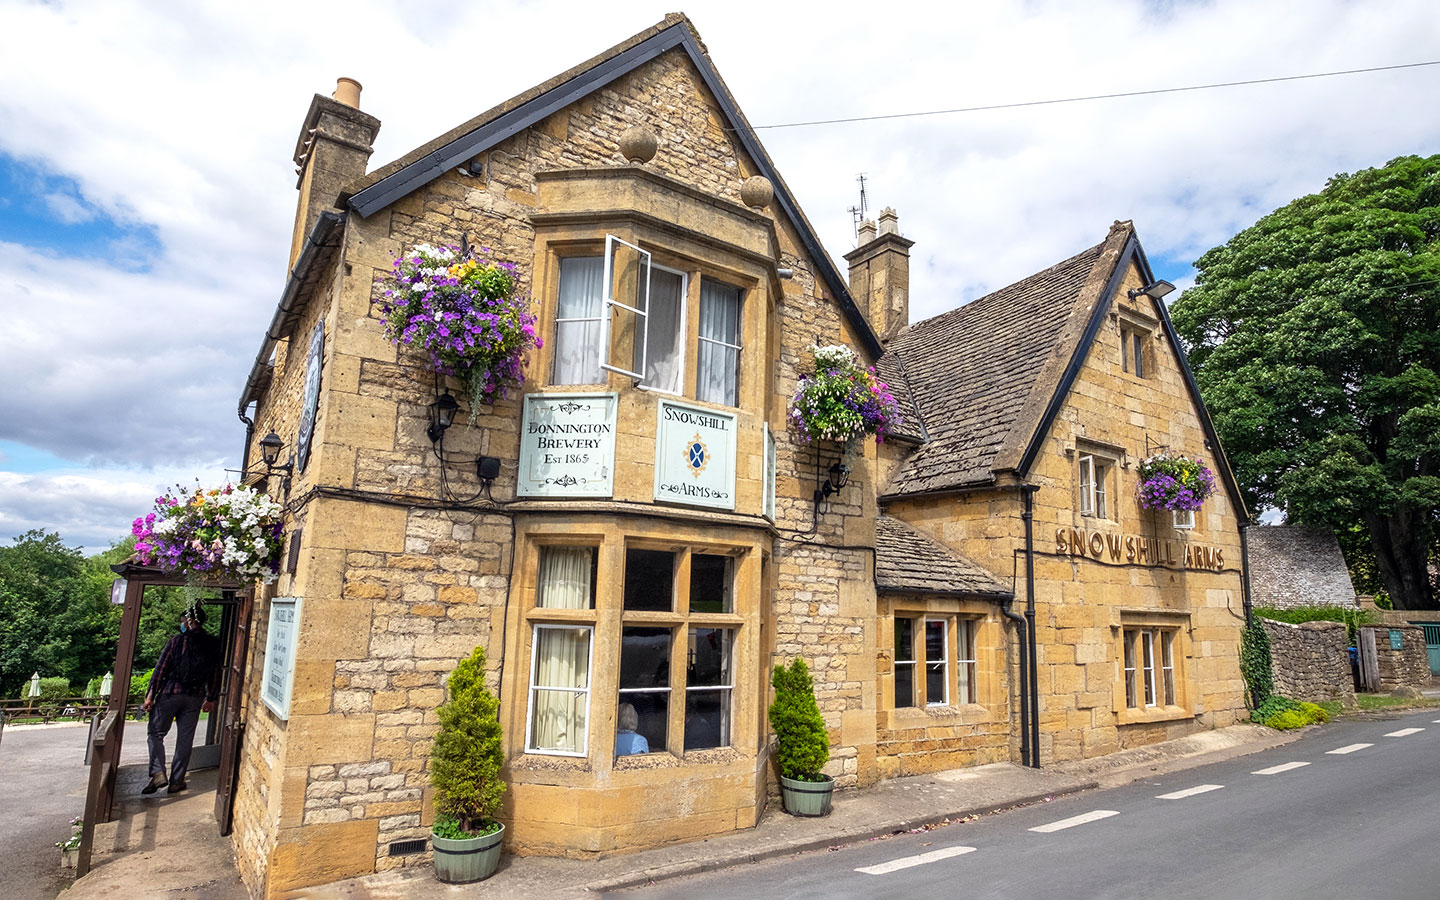 The Snowshill Arms pub near Snowshill Manor